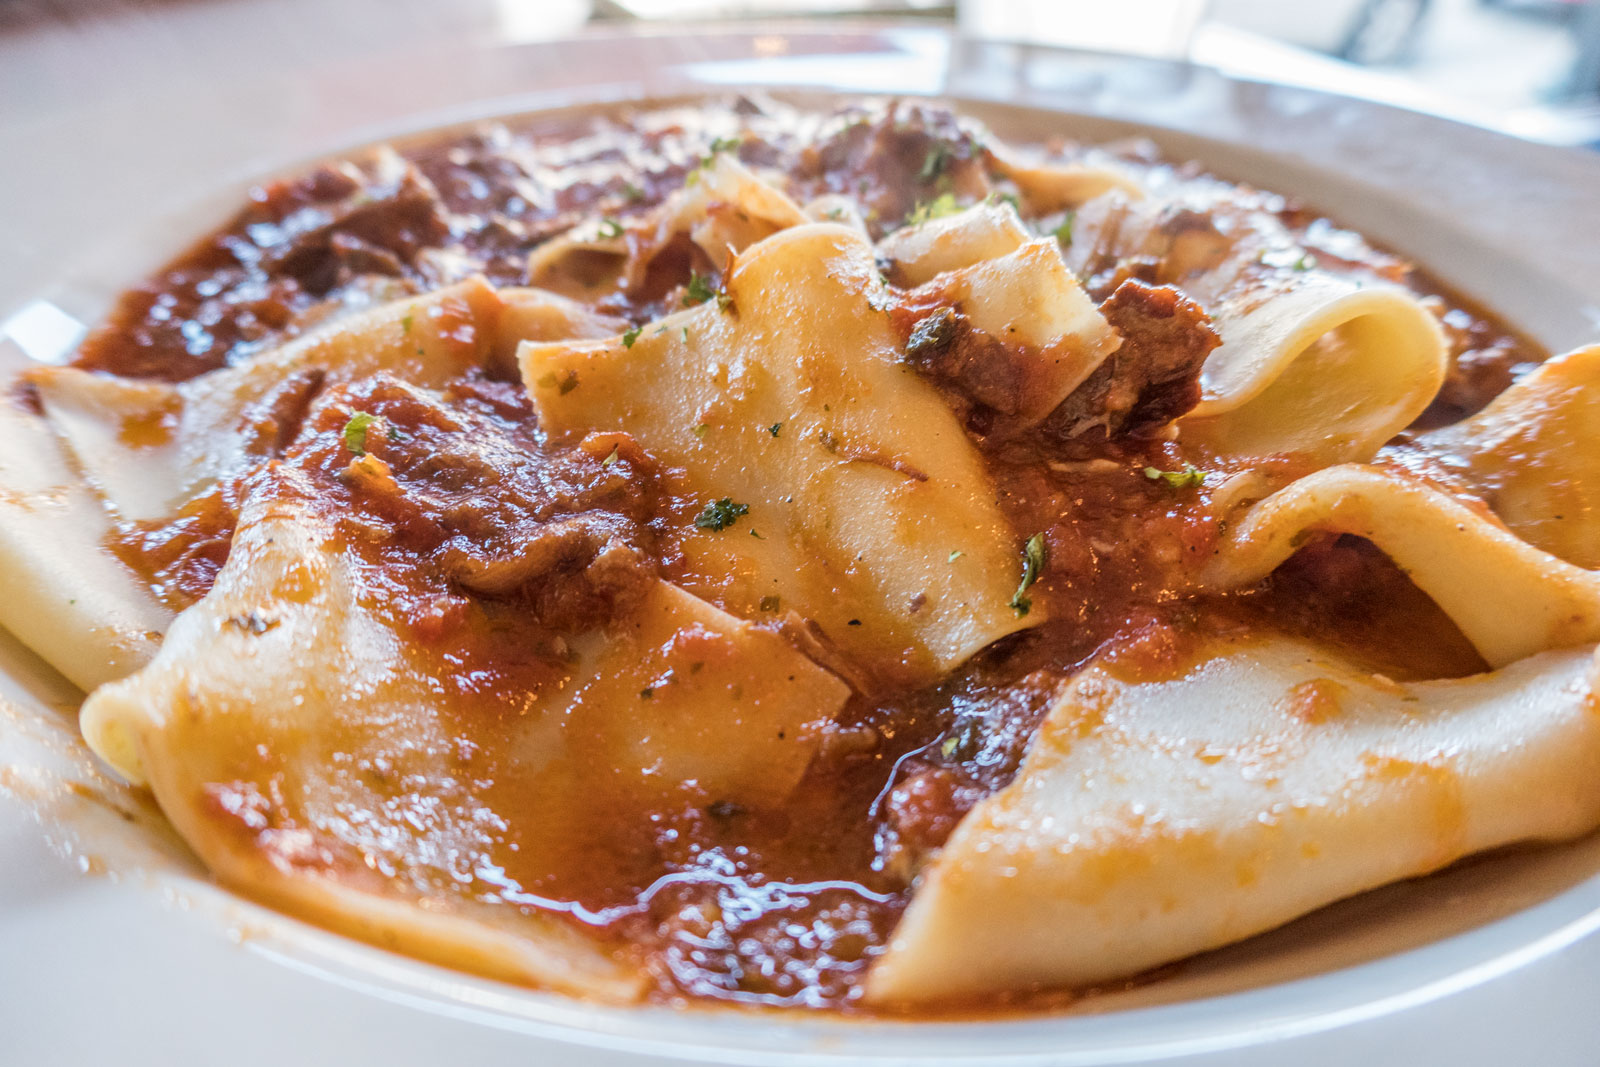 Pappardelle with Oxtail Ragu at Pastorante in Harrisburg Pennsylvania